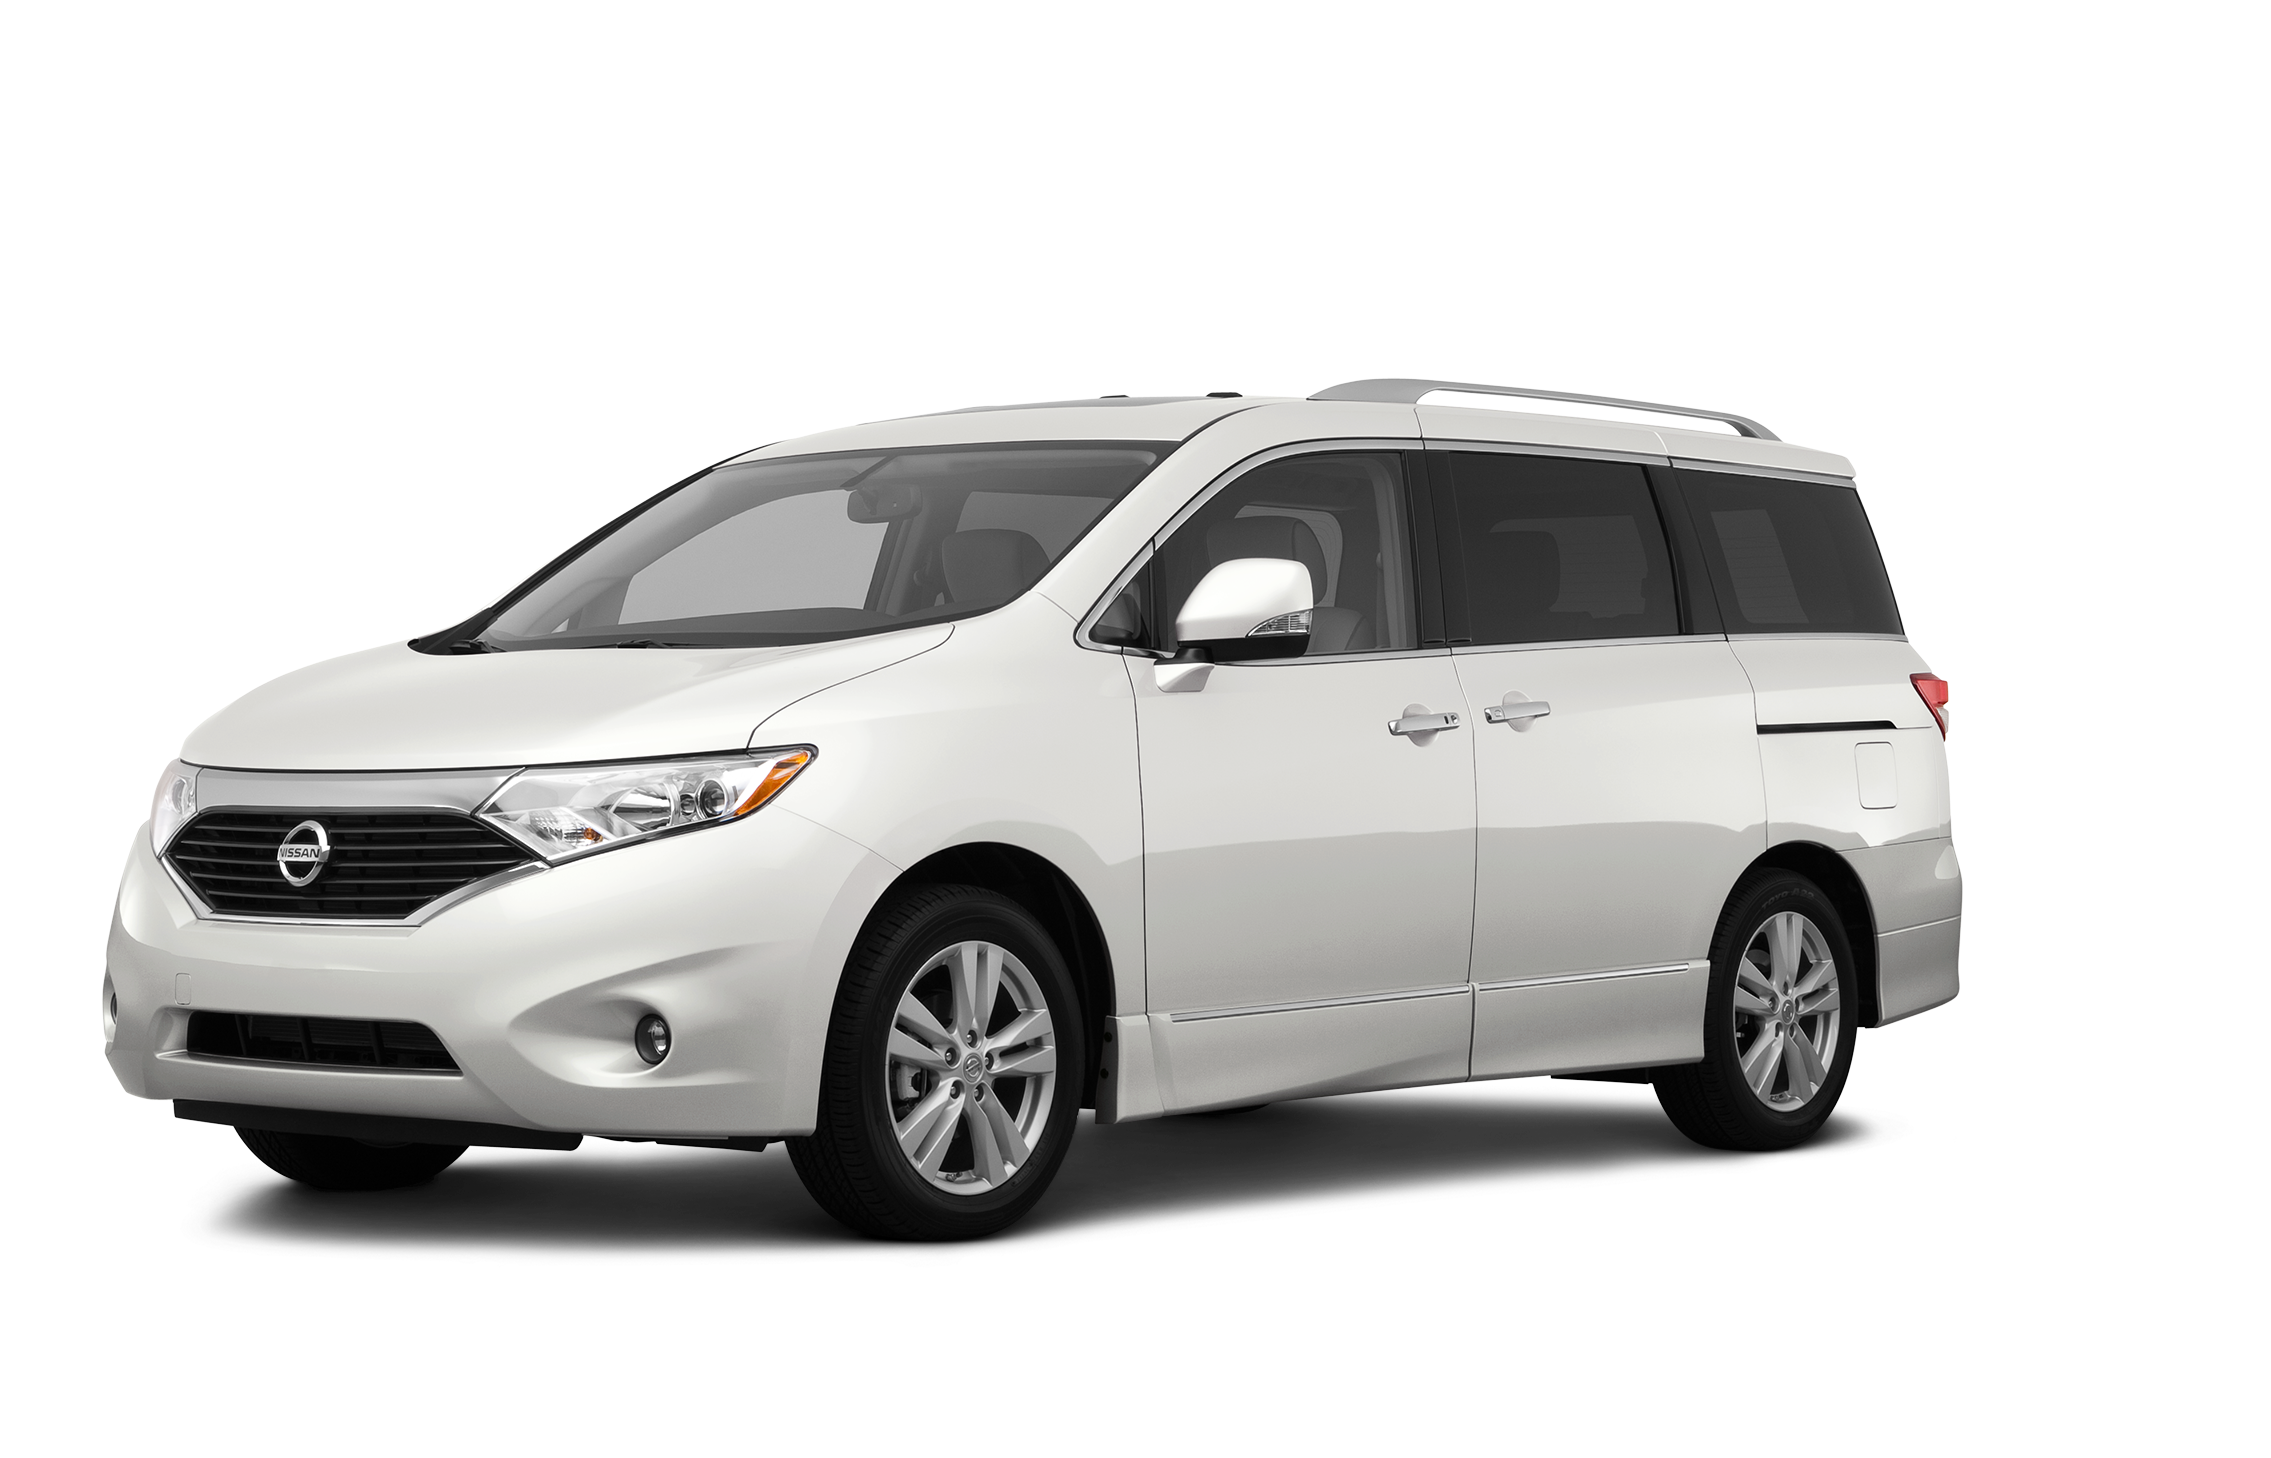 2012-Nissan-Quest-front_7935_032_2400x1800_QAB.png